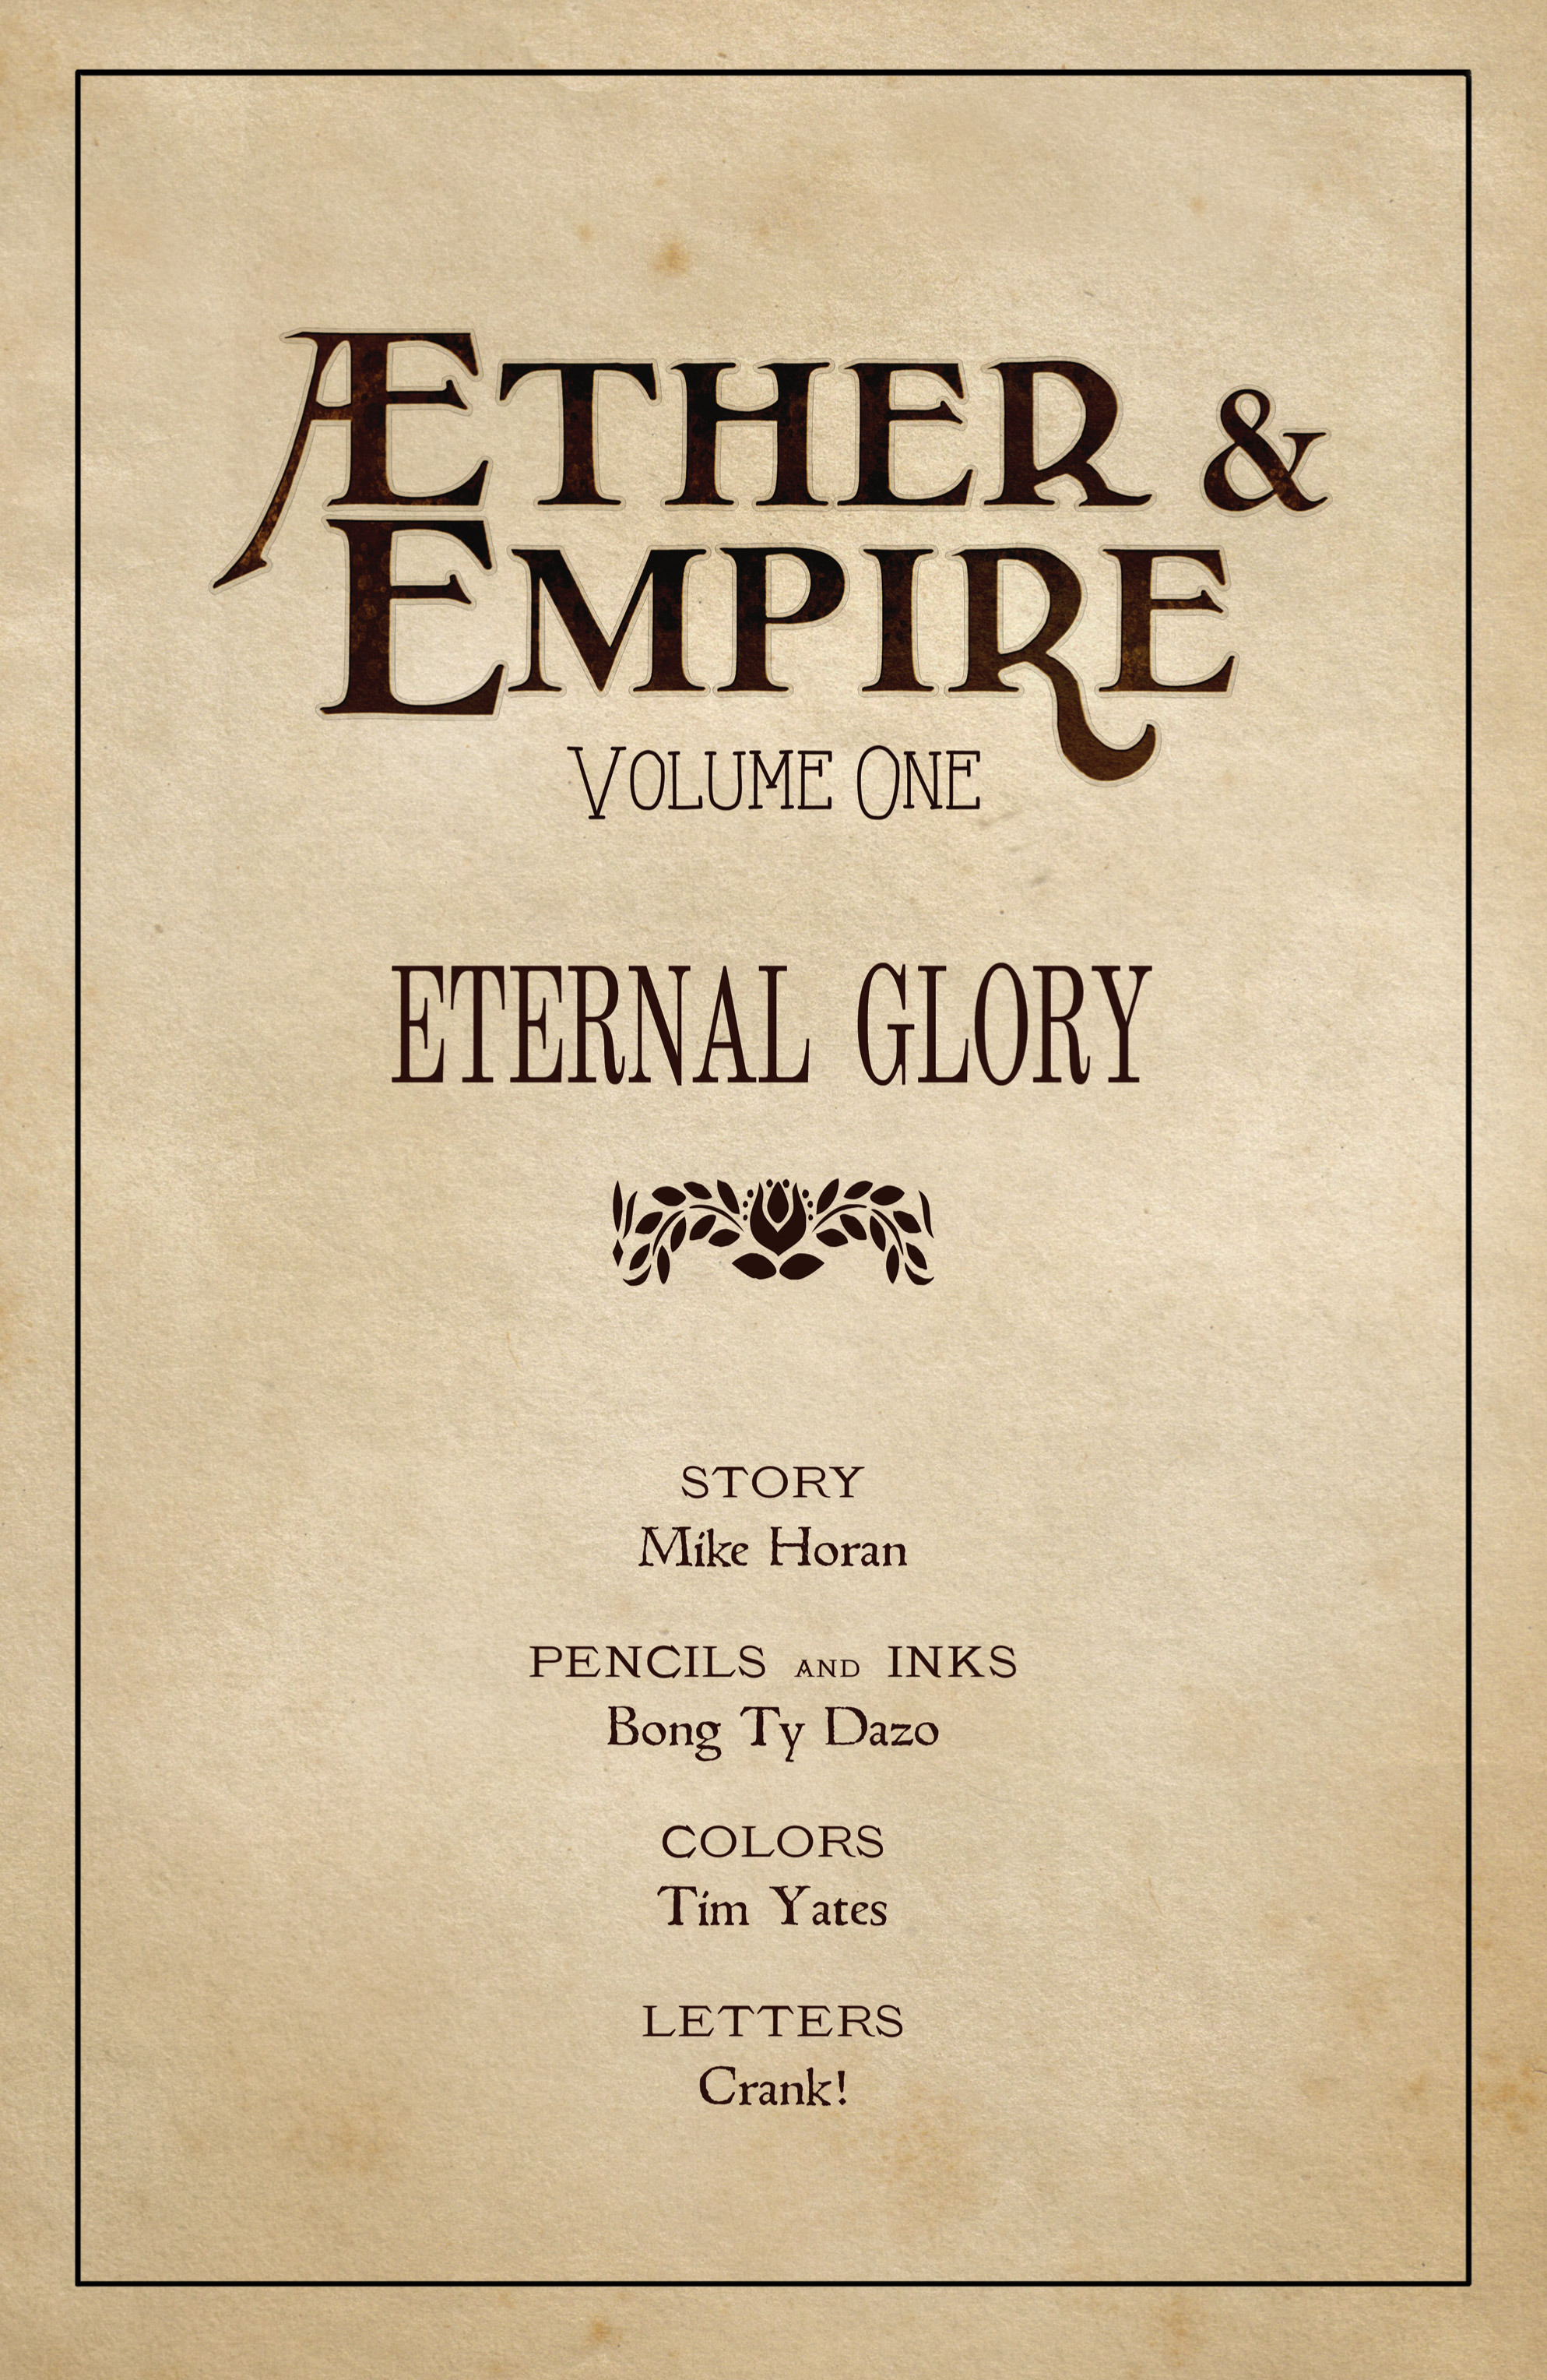 Read online Æther & Empire comic -  Issue # Full - 2